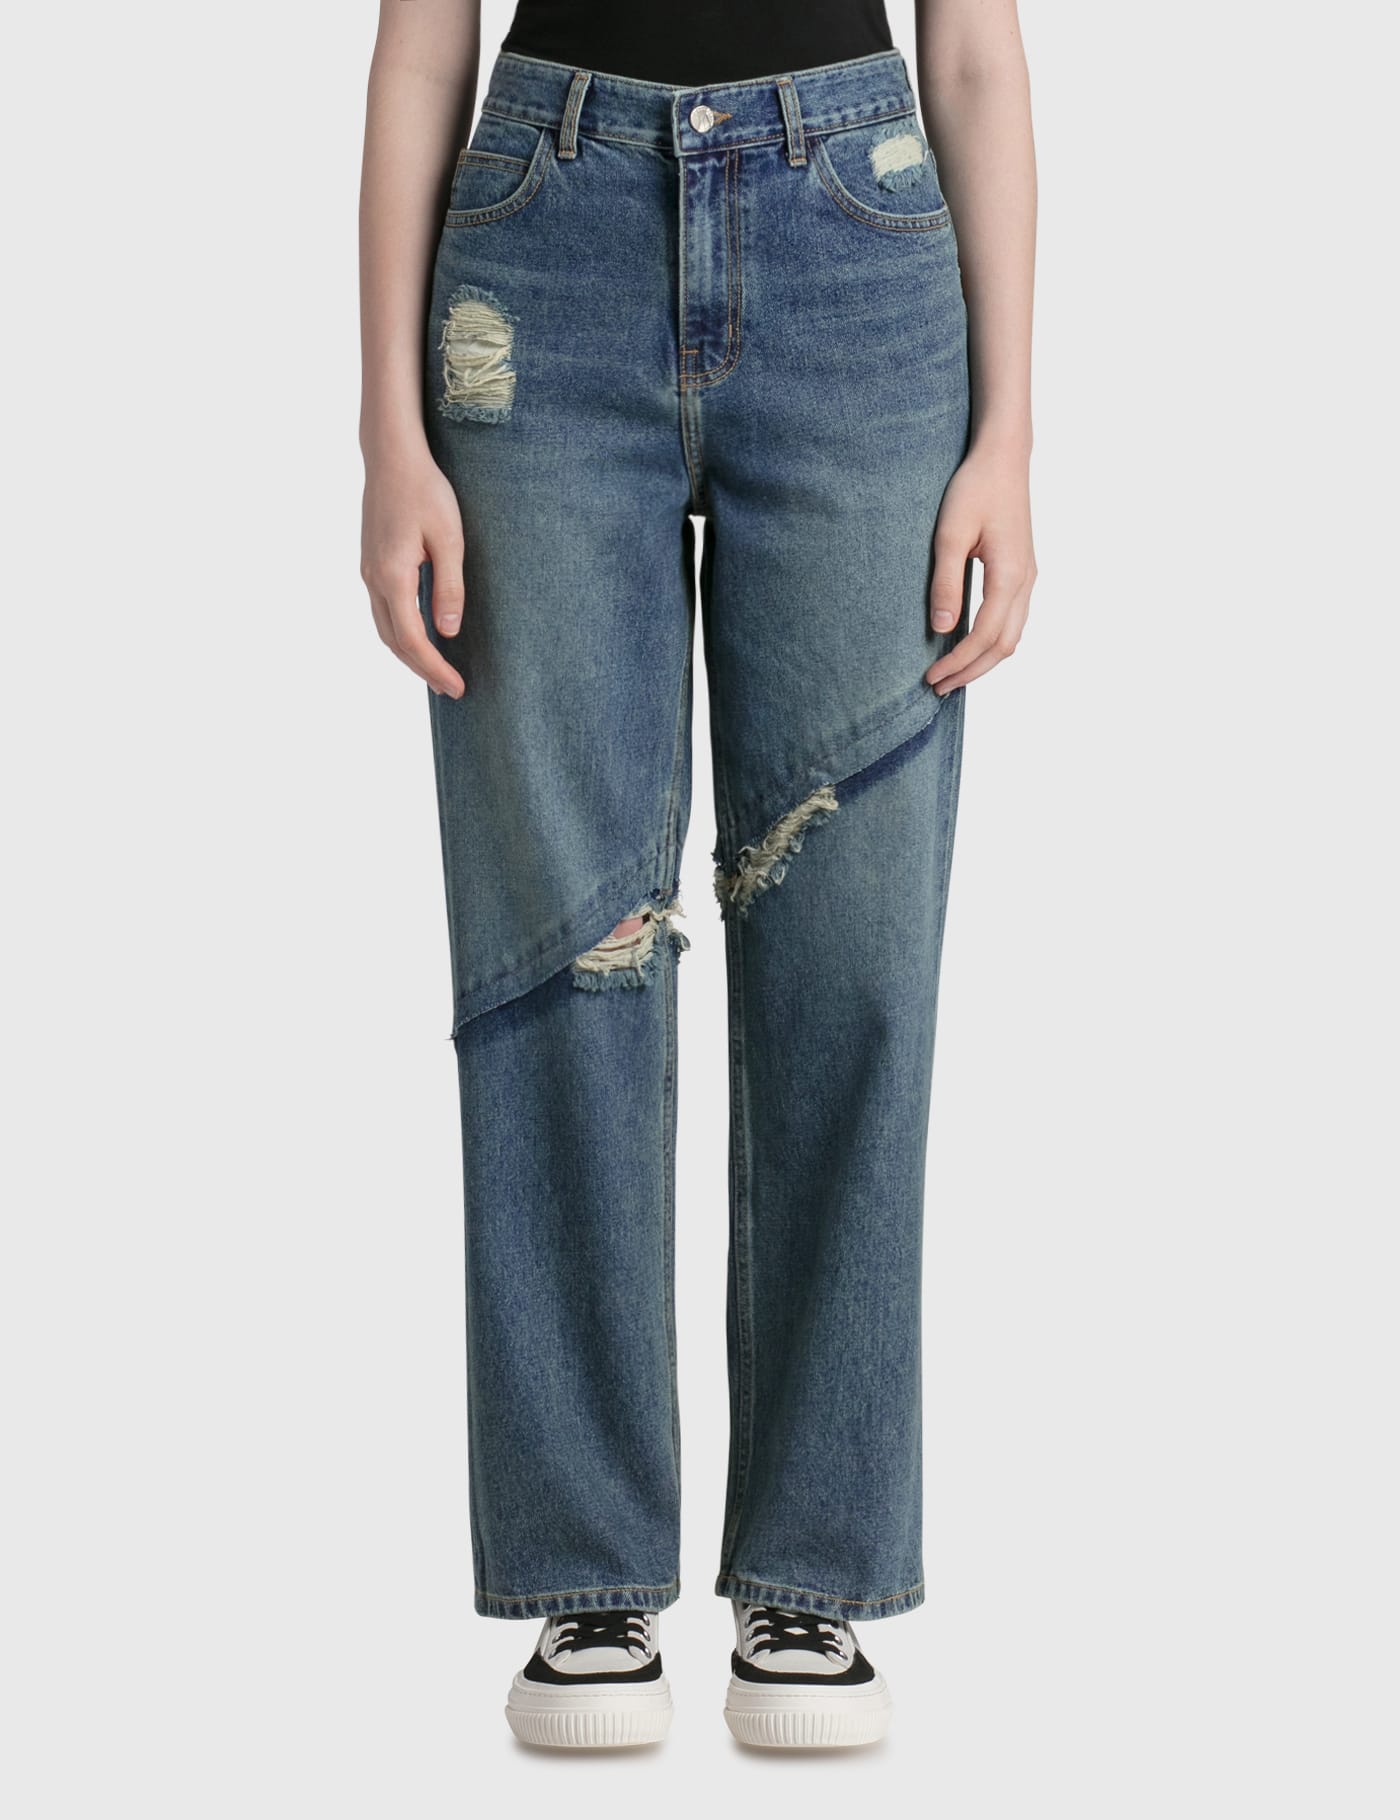 Ader Error - Stami Jeans | HBX - Globally Curated Fashion and 